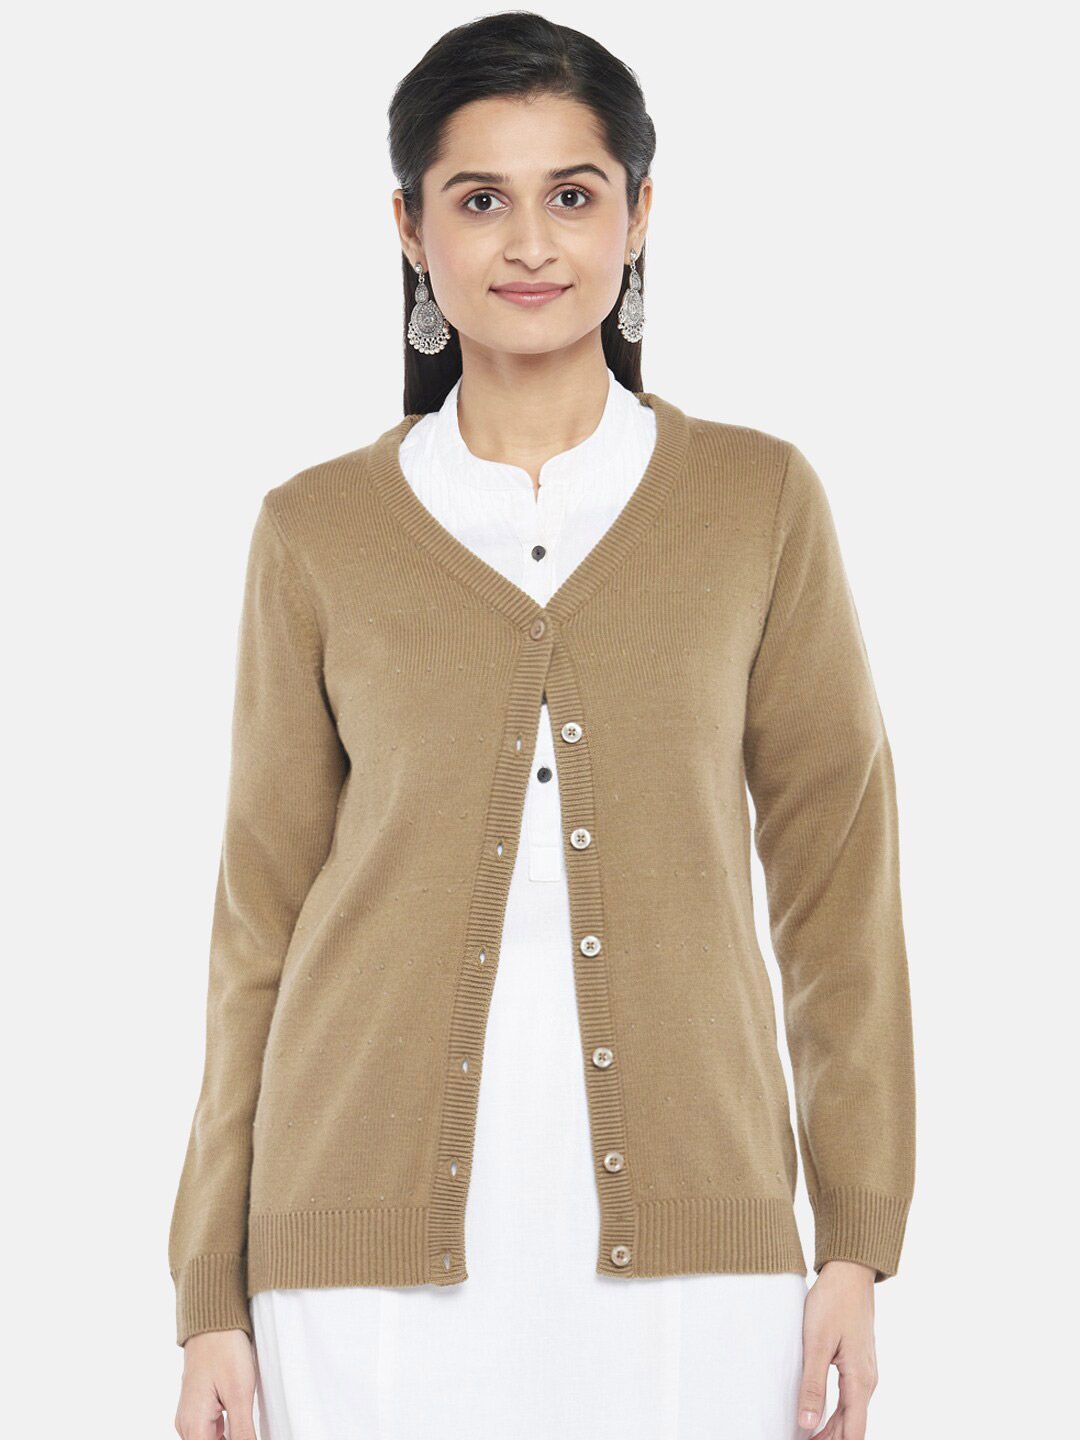 RANGMANCH BY PANTALOONS Women Beige Pure Acrylic Cardigan Sweater Price in India